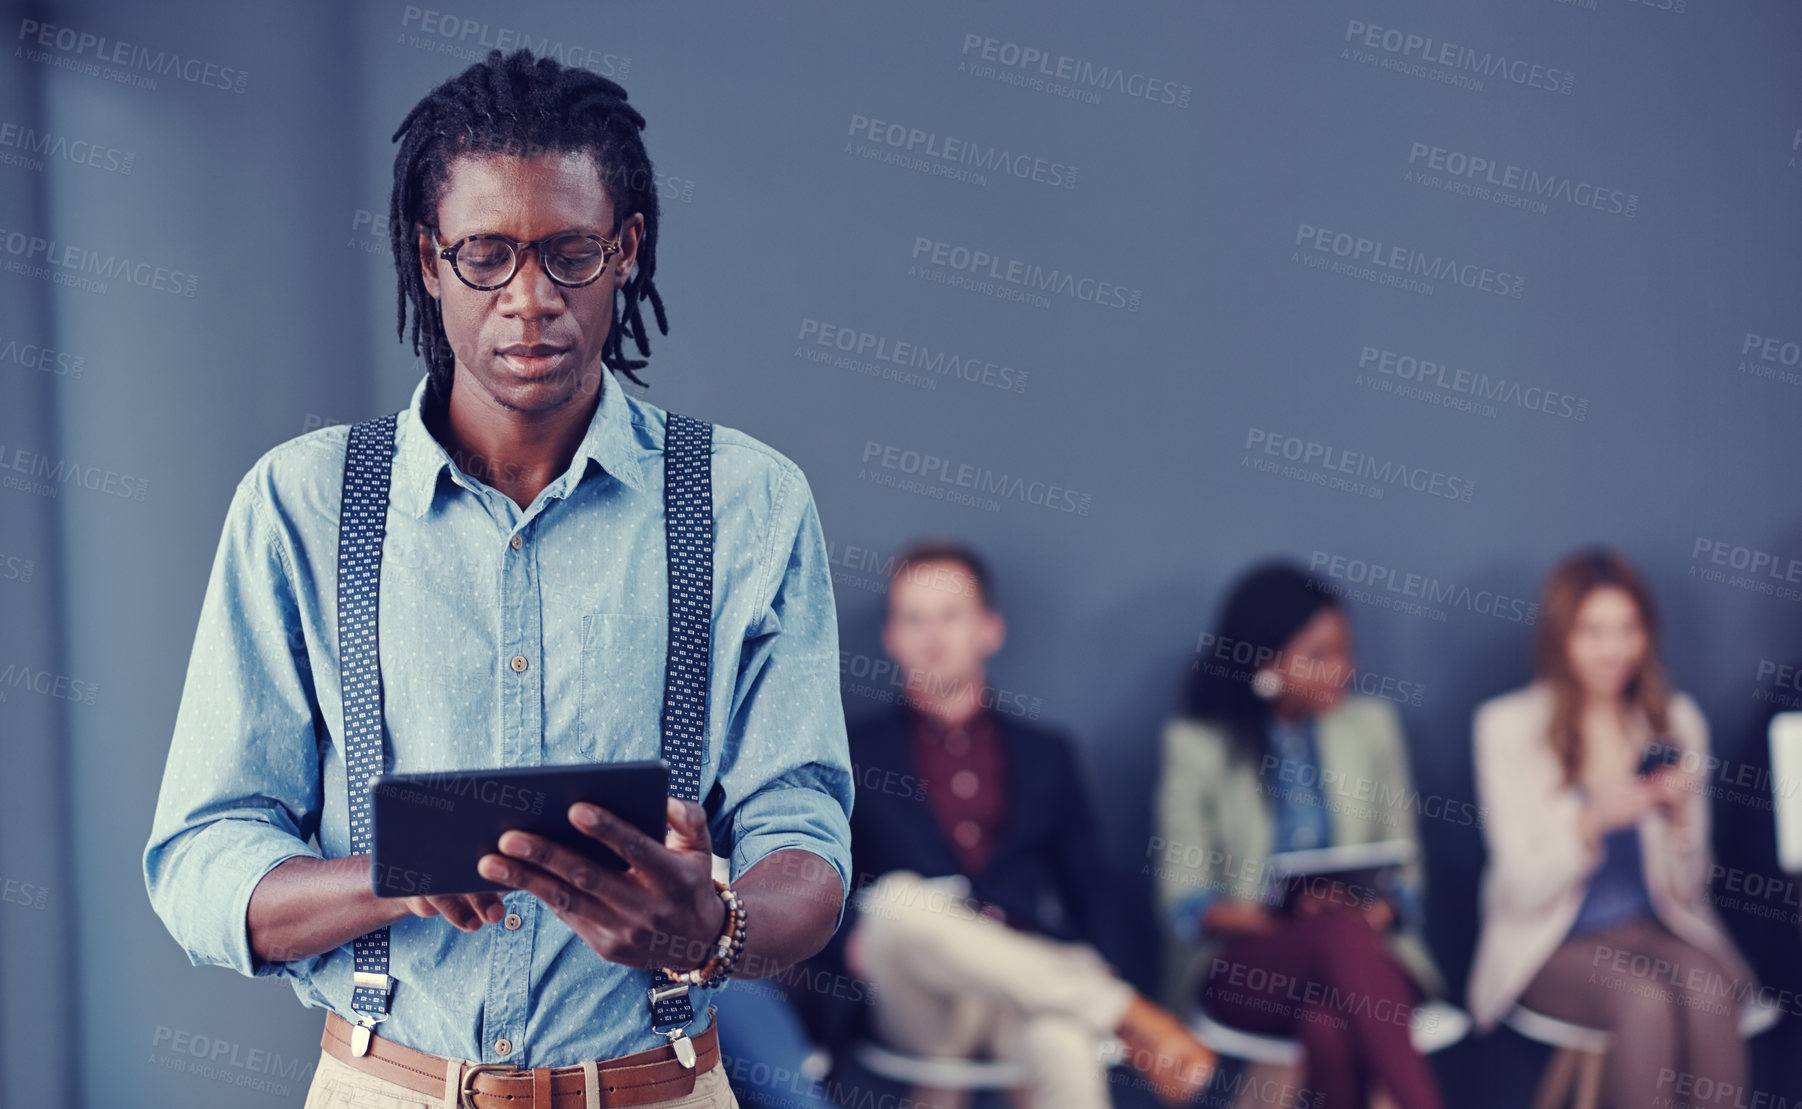 Buy stock photo Cropped shot of a handsome young businessman using a tablet with his colleagues in the background